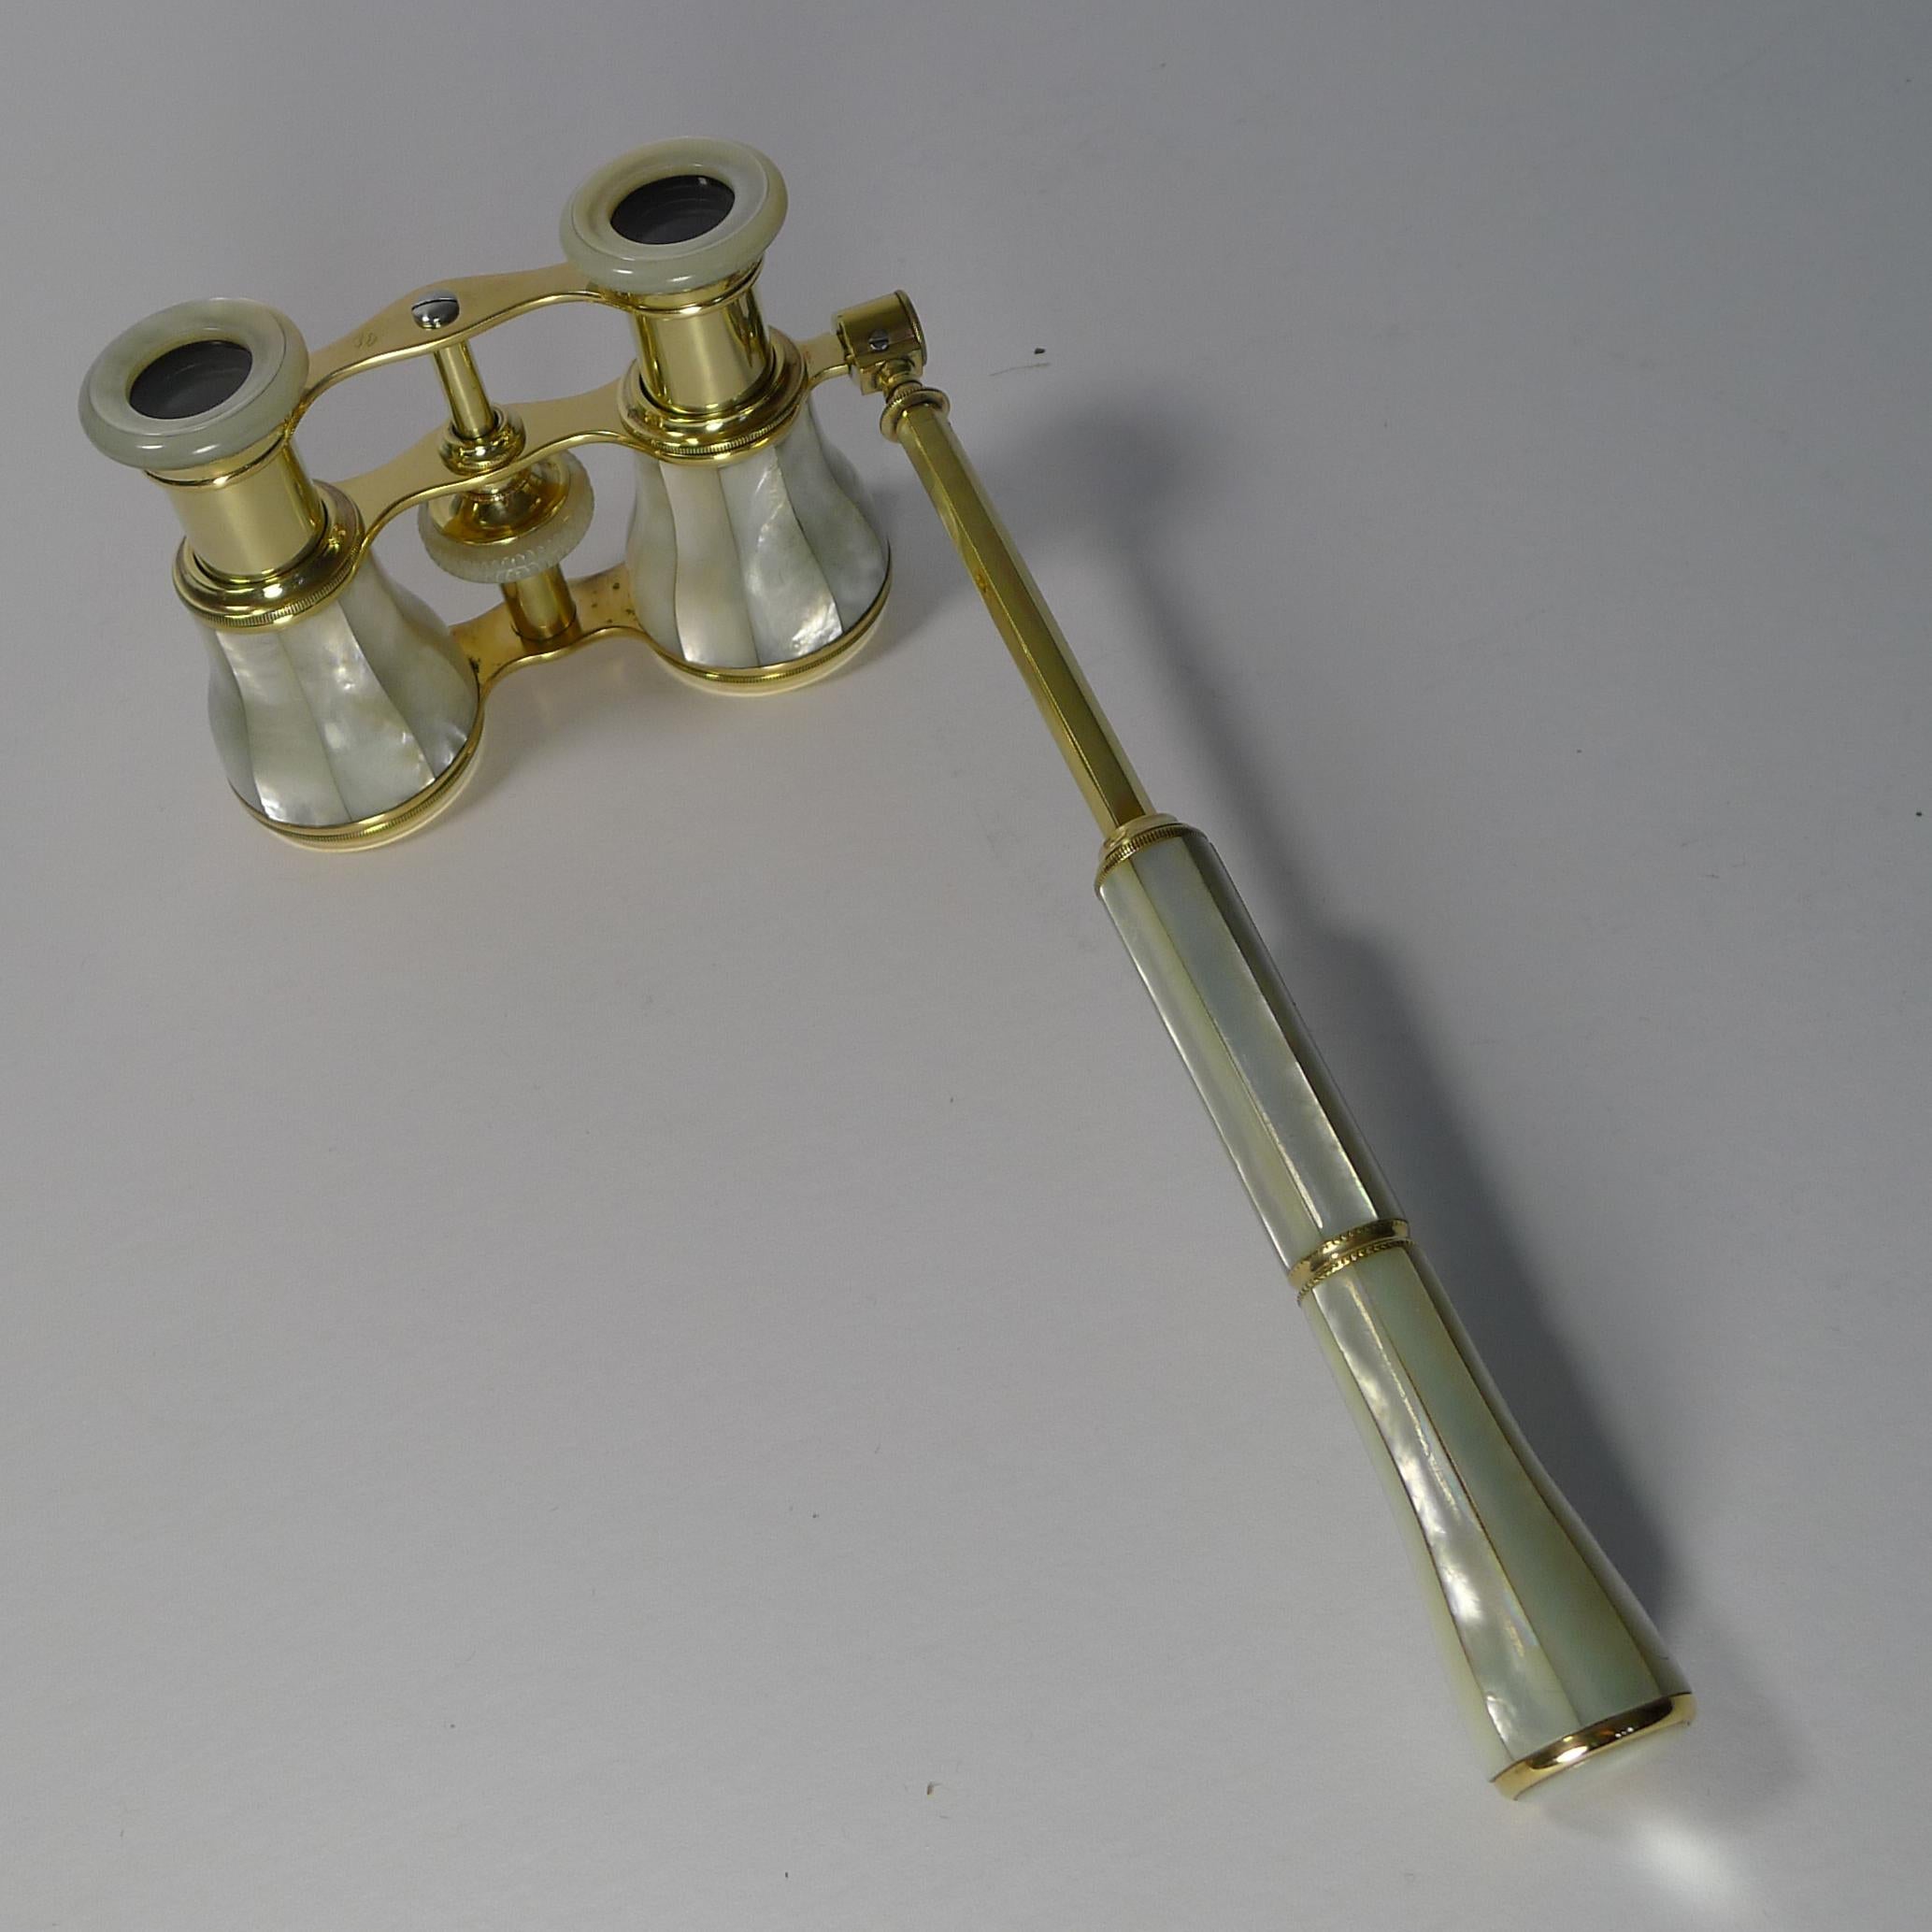 Early 20th Century Antique French Opera Glasses with Detachable Lorgnette Handle, circa 1900